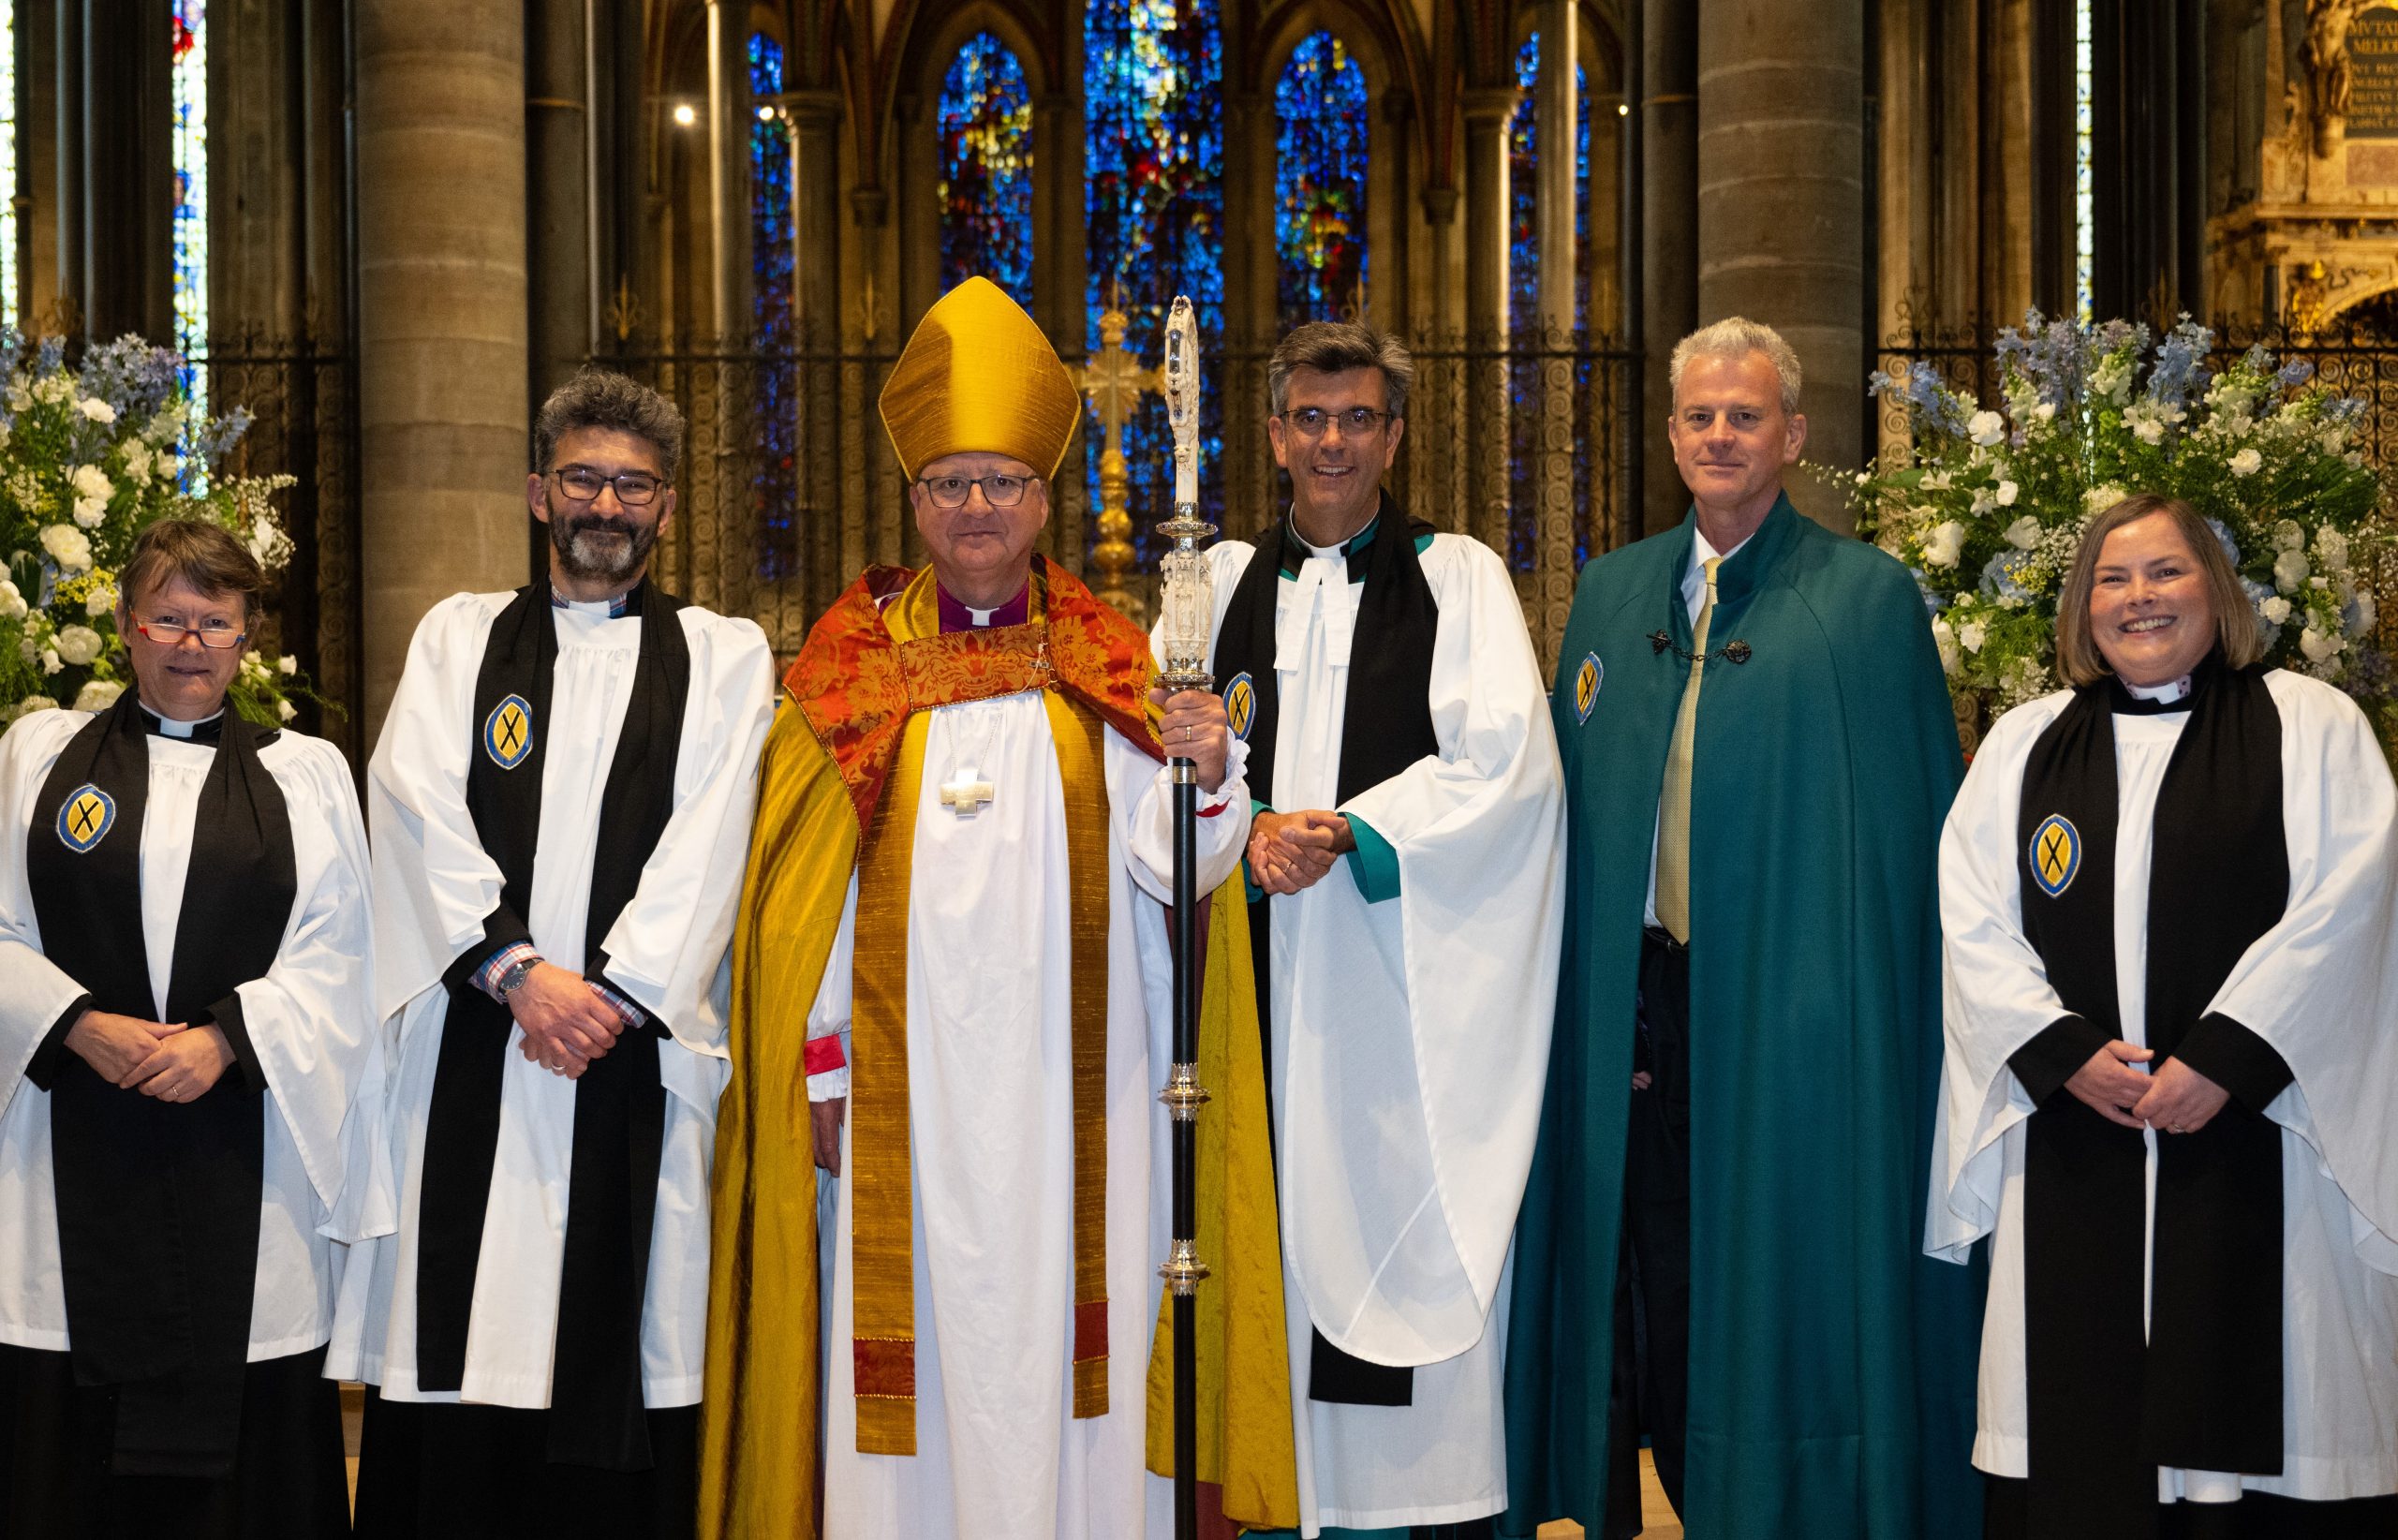 Picture of four canons standing next to the Bishop and Dean in garments